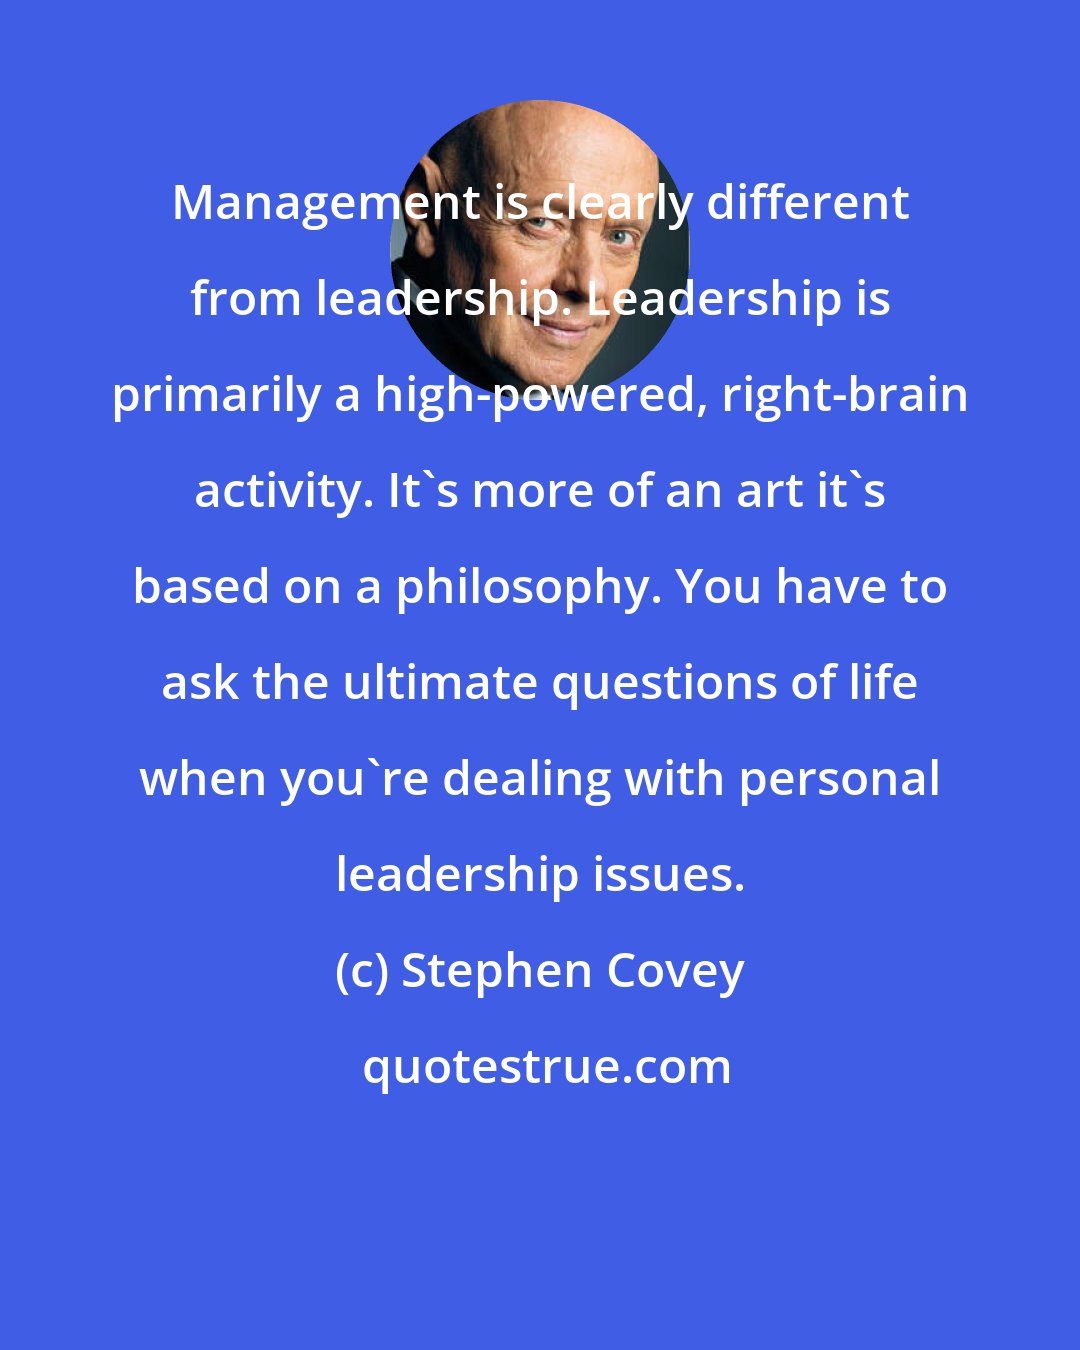 Stephen Covey: Management is clearly different from leadership. Leadership is primarily a high-powered, right-brain activity. It's more of an art it's based on a philosophy. You have to ask the ultimate questions of life when you're dealing with personal leadership issues.